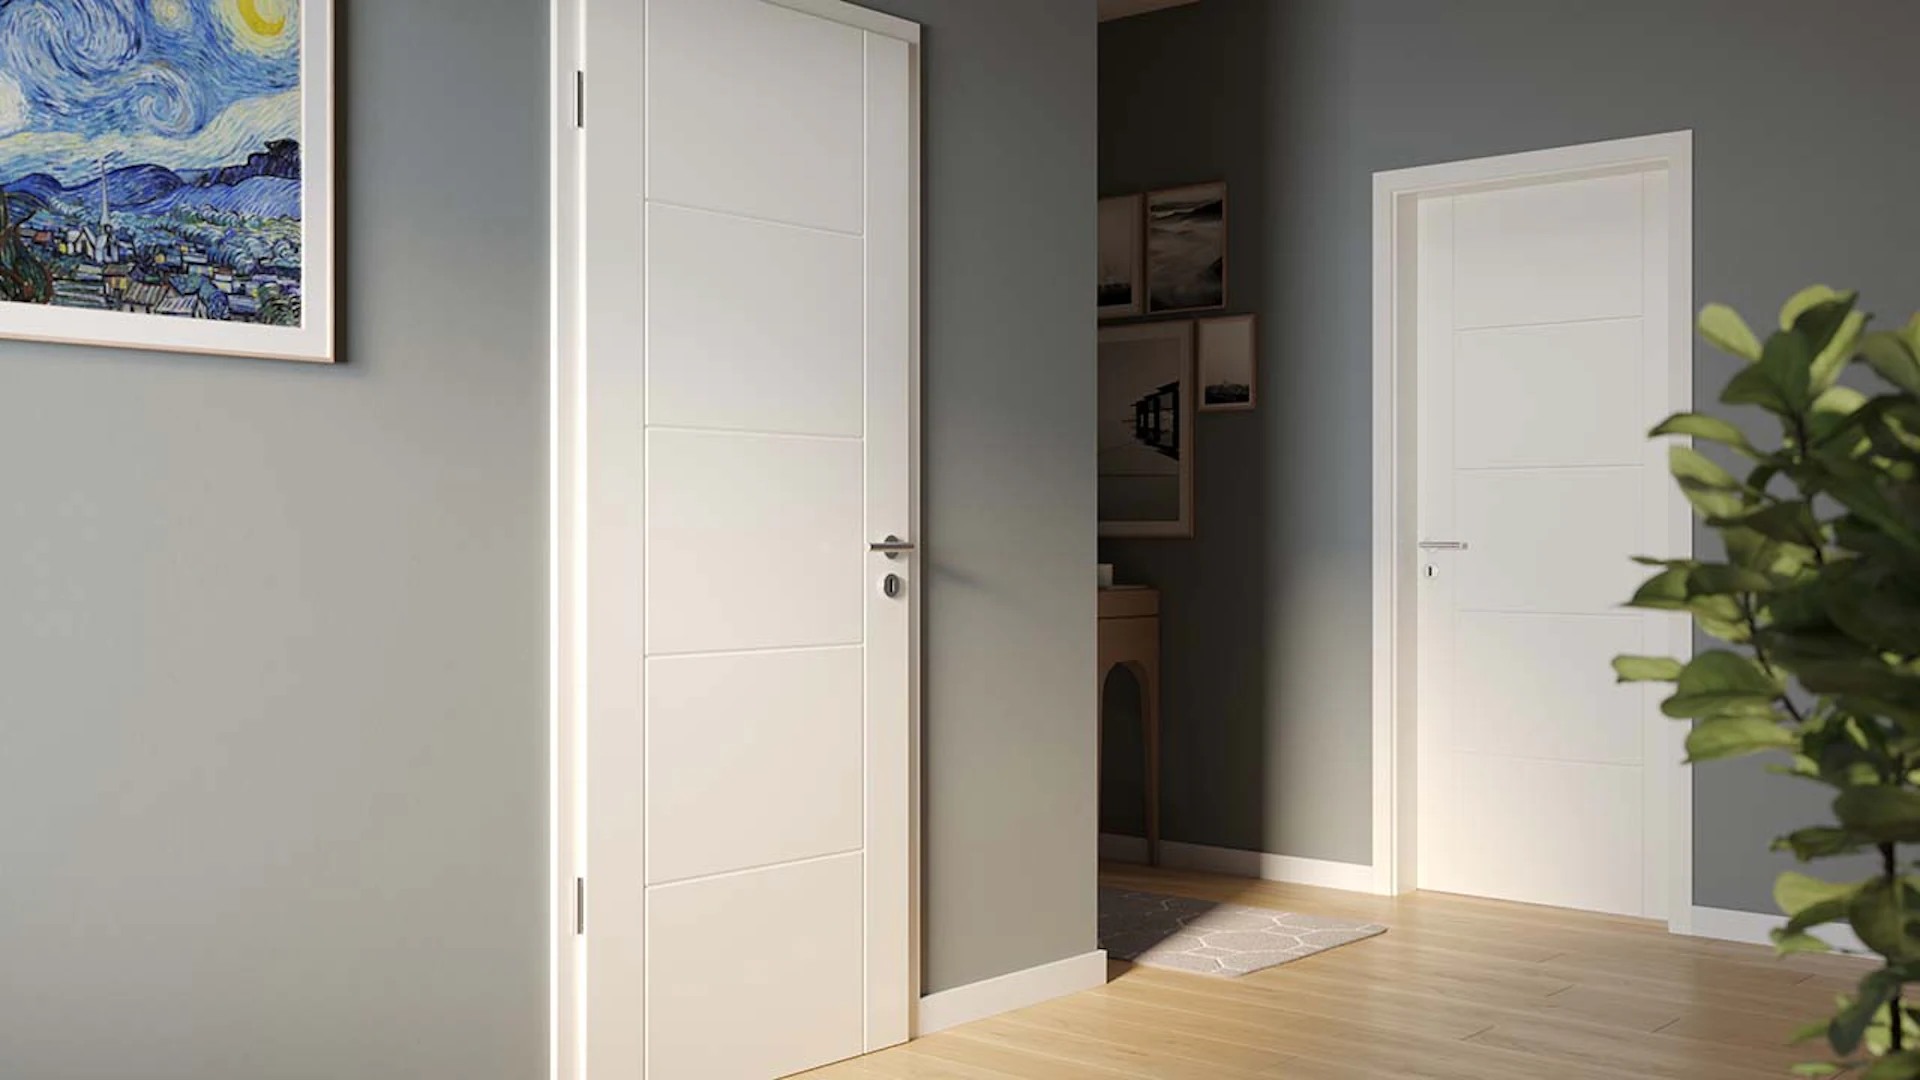 planeo interior door lacquer 2.0 - Kirsa 9010 white lacquer 1985 x 860 mm DIN L - round RSP hinge 3-t